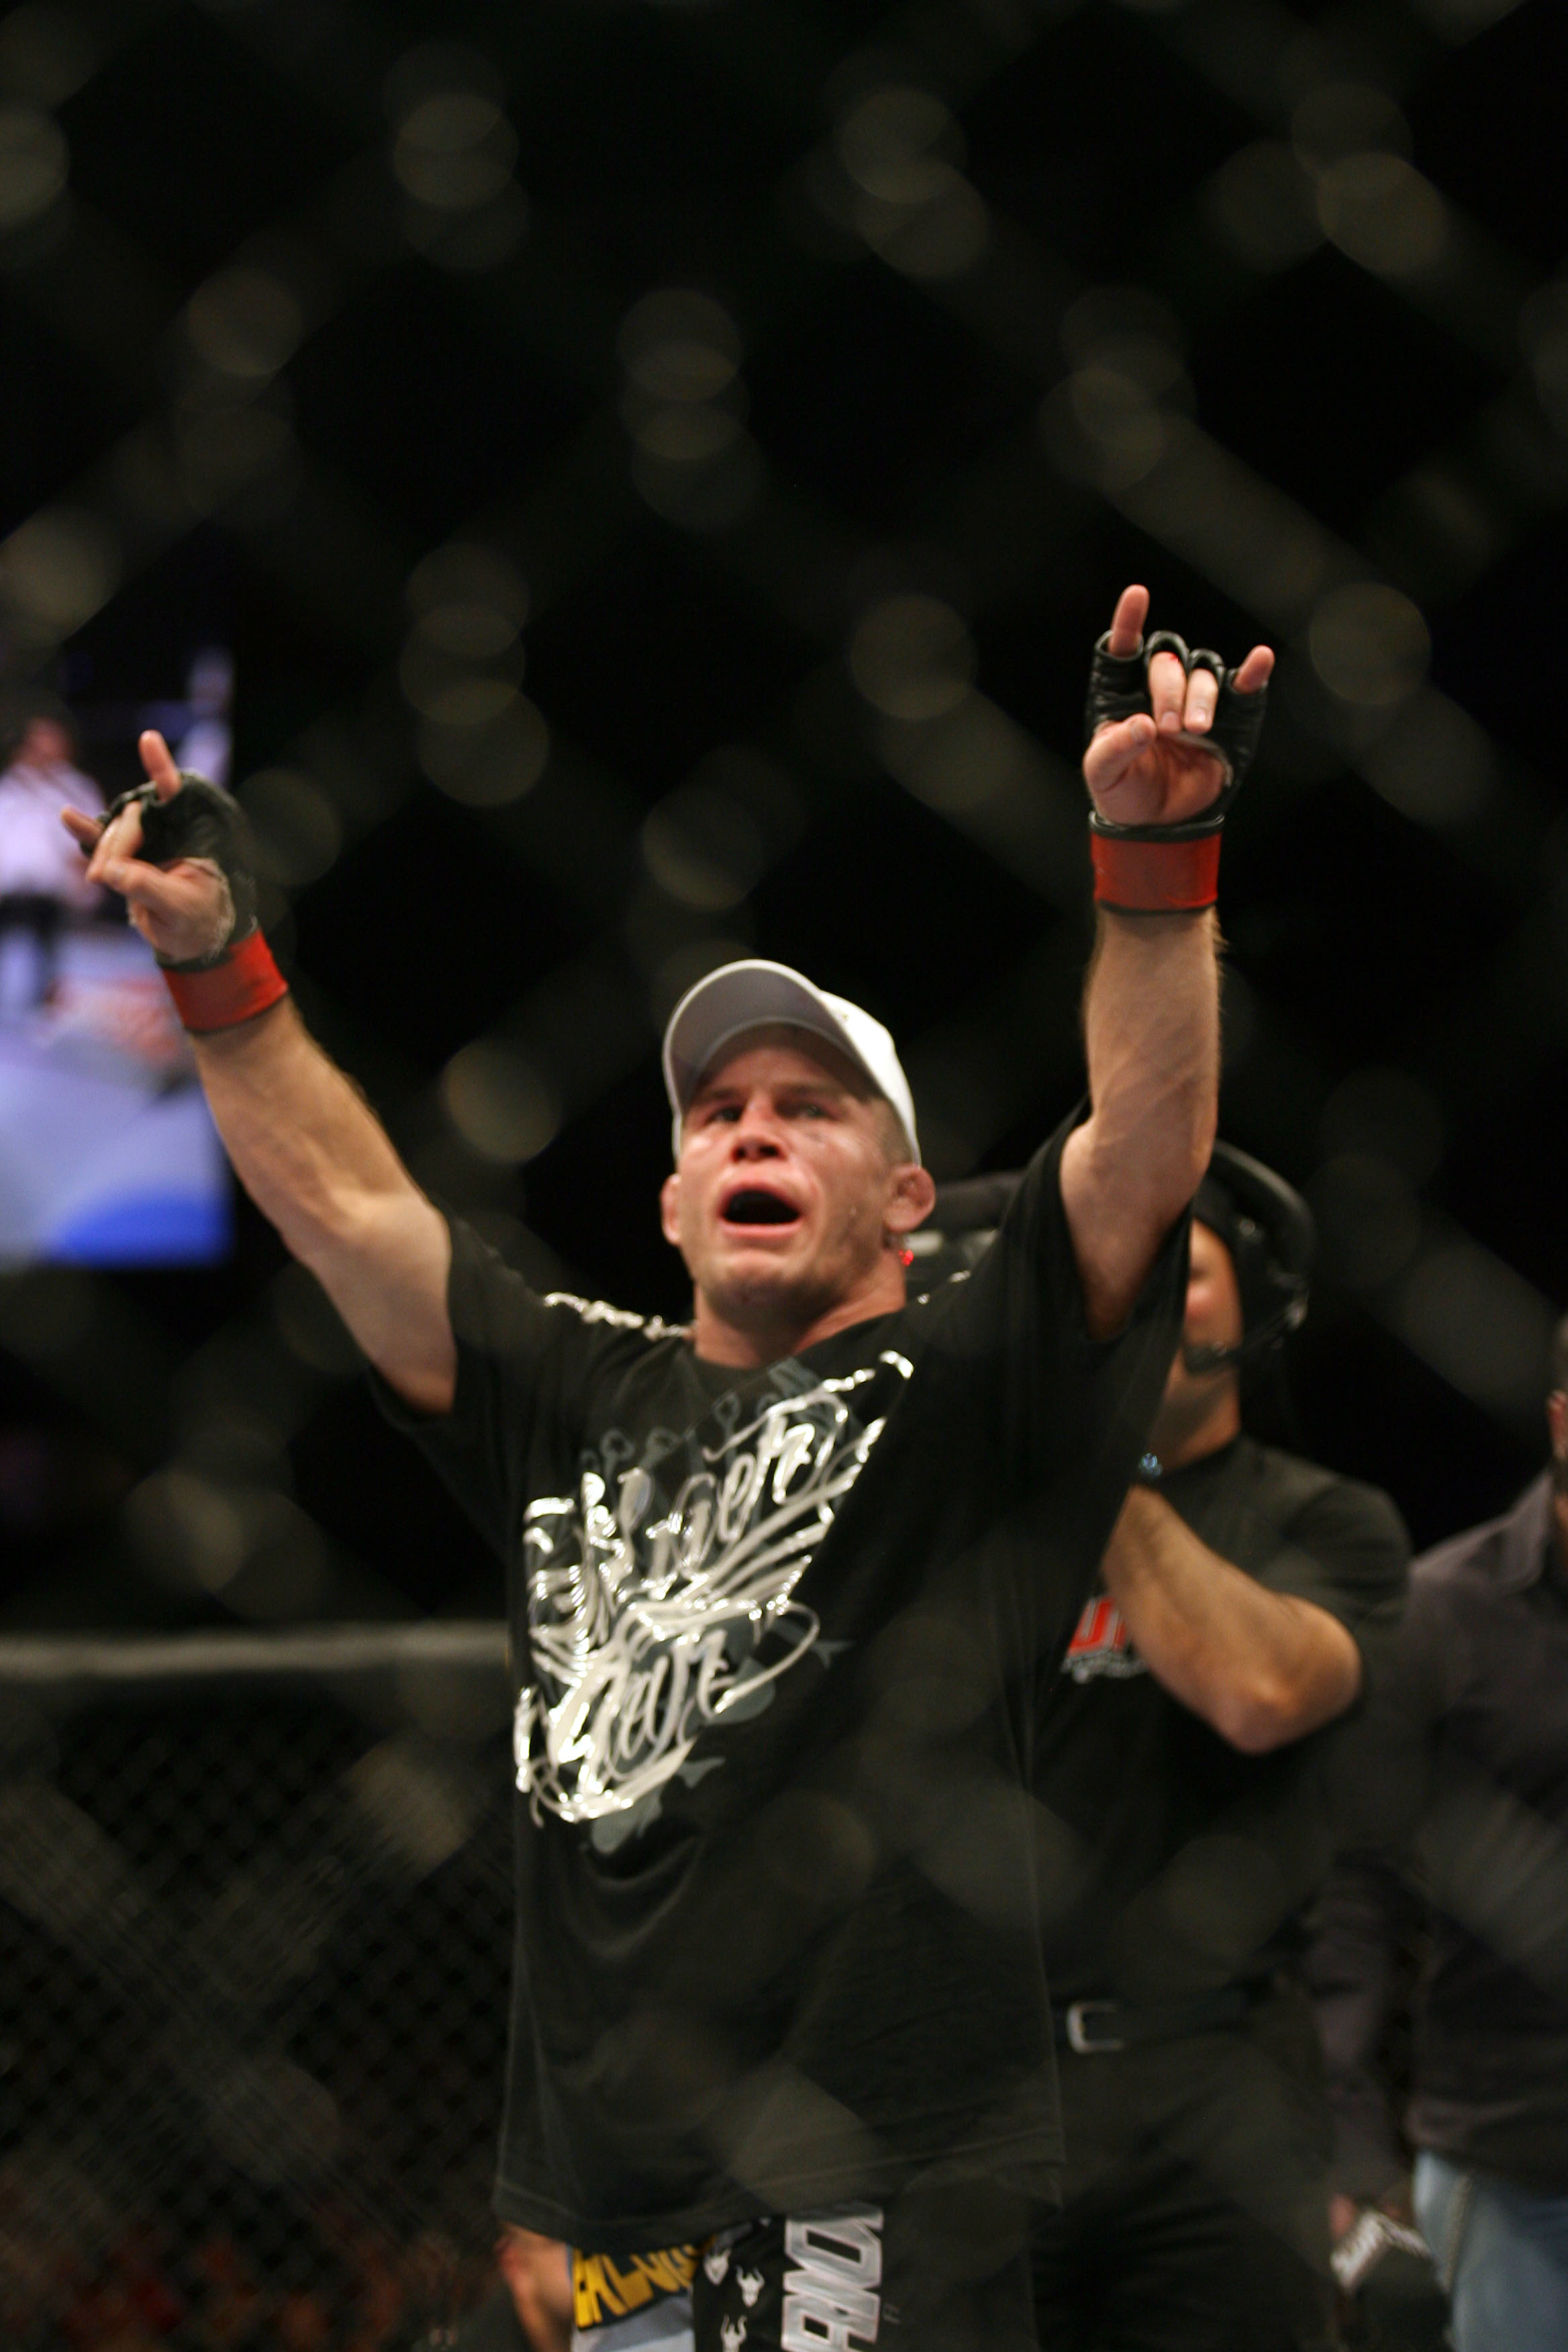 CHICAGO - OCTOBER 25:  Sean Sherk celebrates his win in the Lightweight bout at UFC's Ultimate Fight Night at Allstate Arena on October 25, 2008 in Chicago, Illinois. (Photo by Tasos Katopodis/Getty Images)